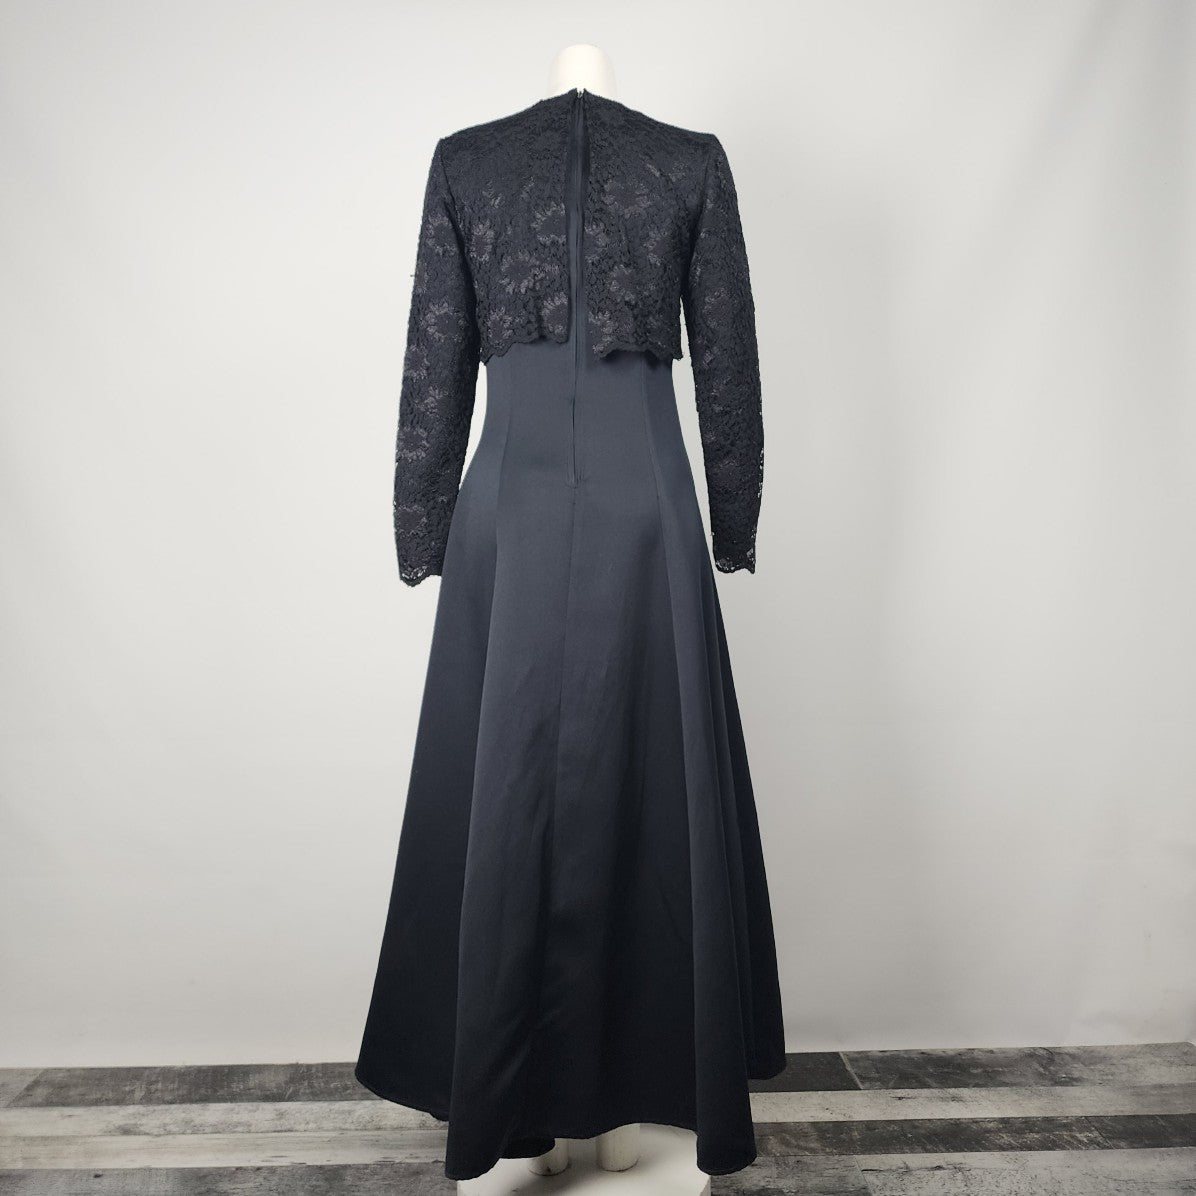 Vintage Black Satin Lace Overlay Long Sleeve Gown Size S